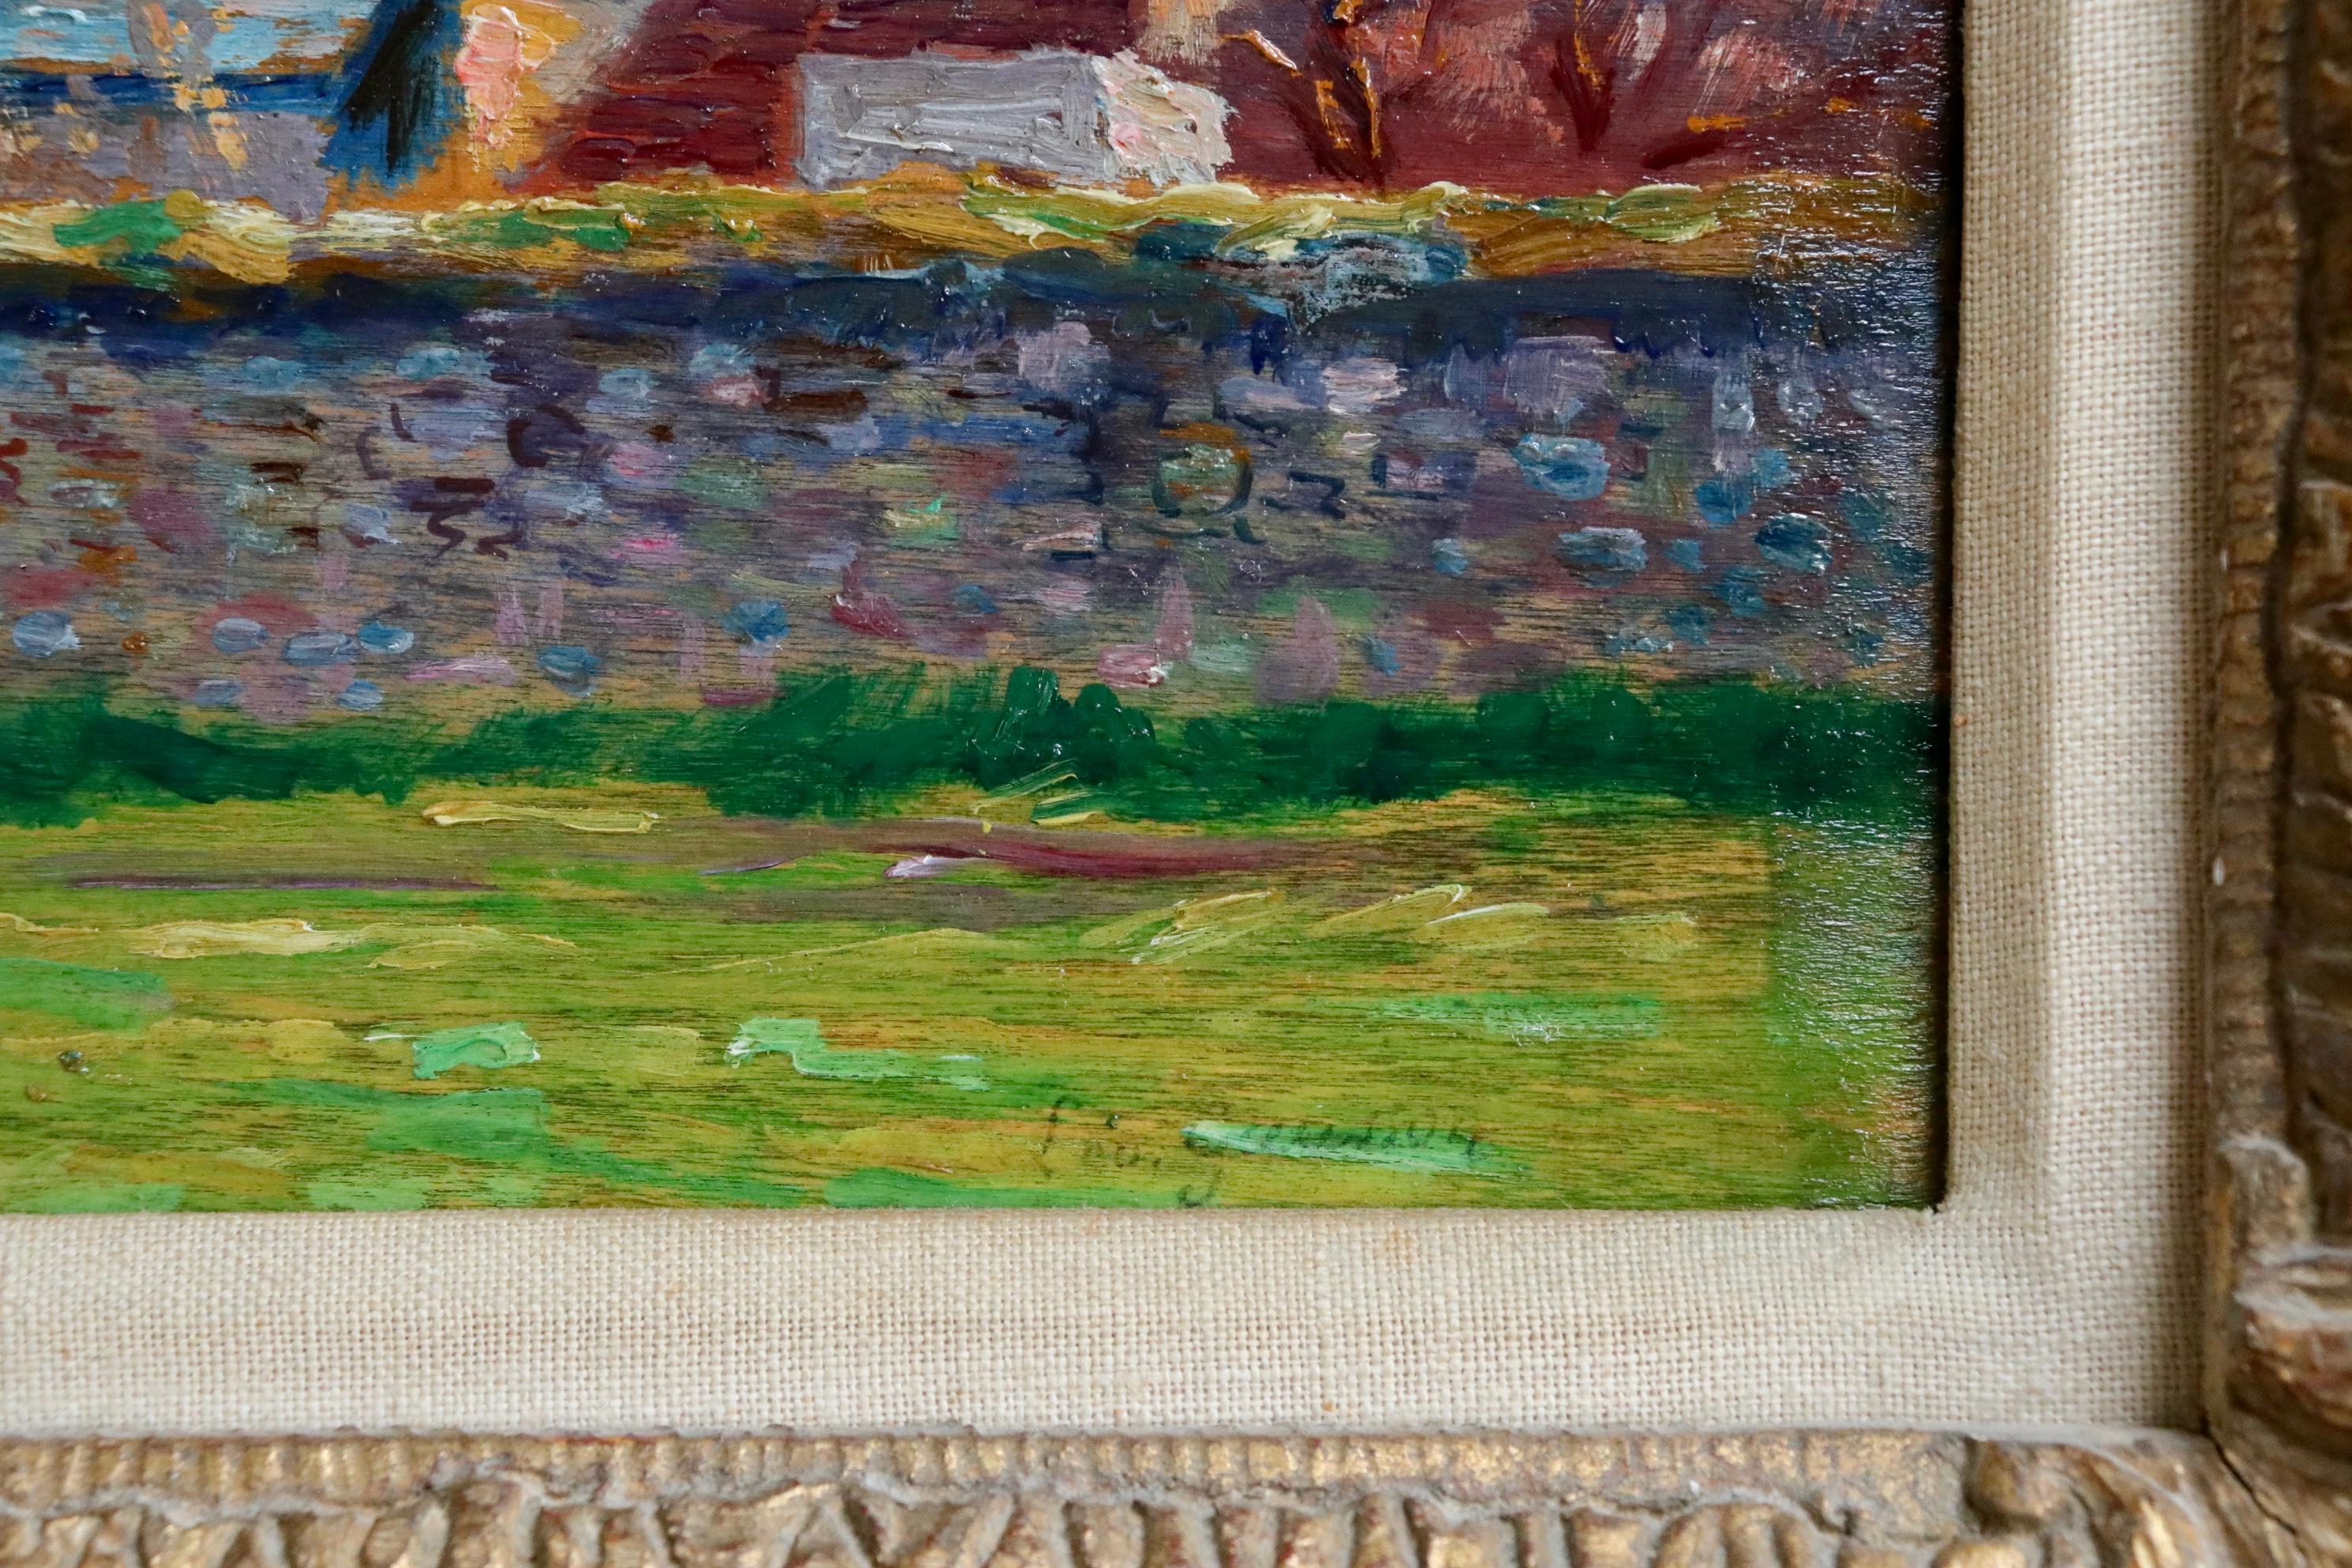 Bruyères-Sous-Laon - Post Impressionist Landscape Oil by Leo Marie Gausson - Post-Impressionist Painting by Léo Marie Gausson